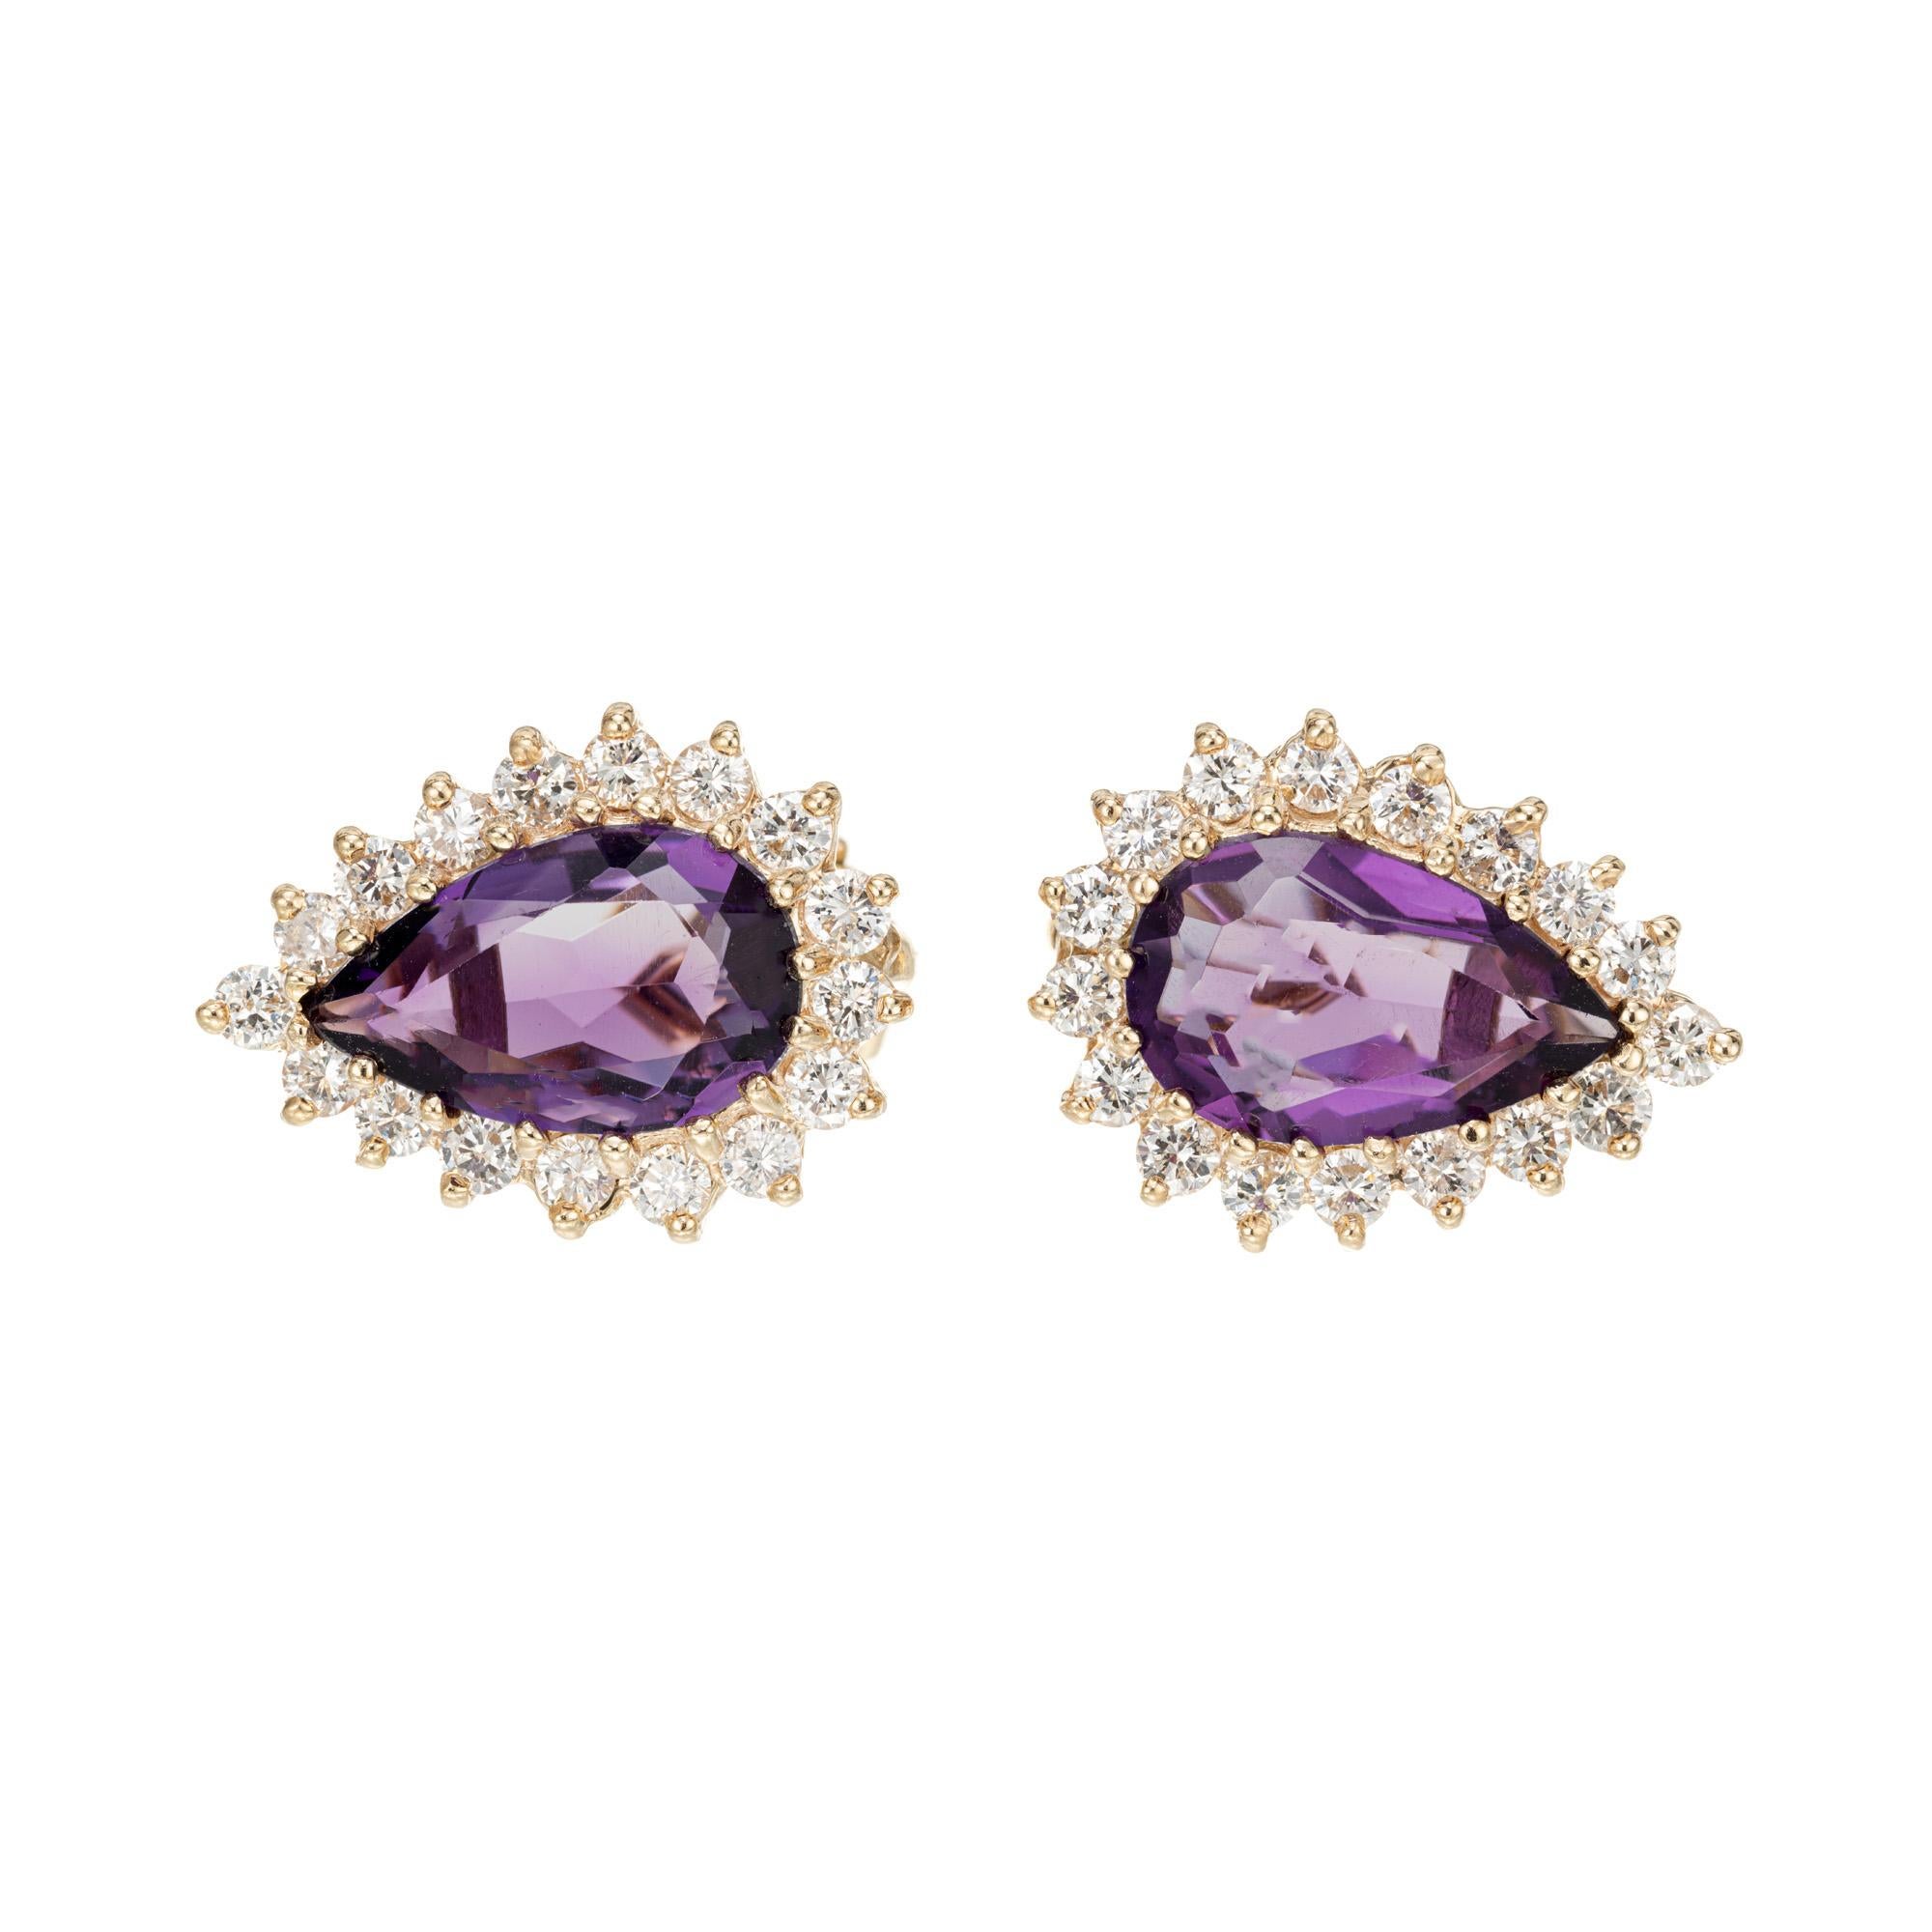 1960's Amethyst and diamond halo earrings. 2 pear shaped amethyst each with a halo of round full cut diamonds in 14 yellow gold clip post style settings.

2, 13 x 8.5mm fine pear bright purple Amethyst, approx. total weight 7.00cts, VS
34 round full